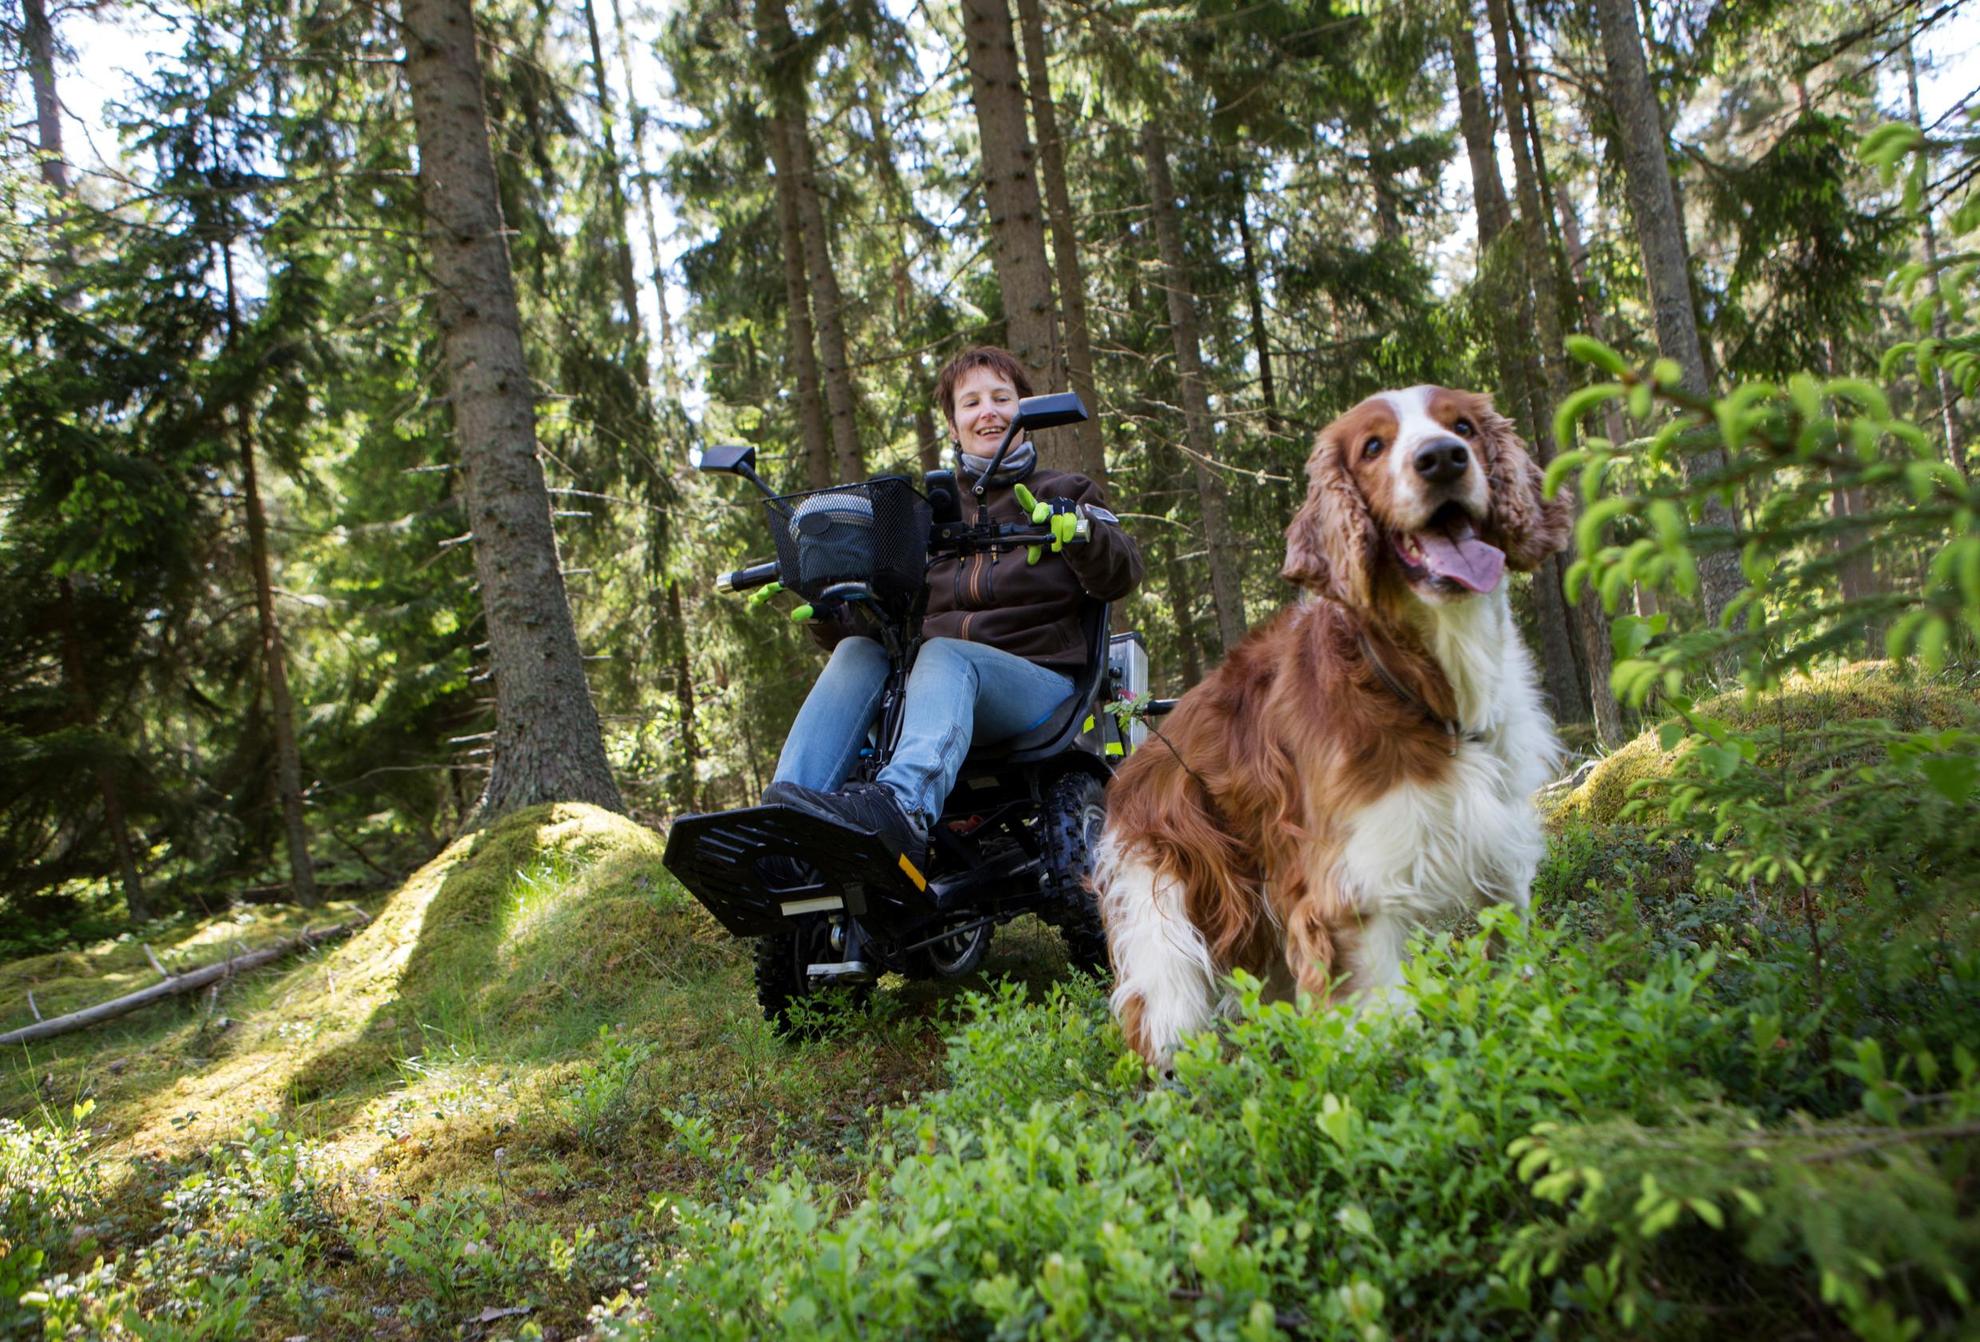 A woman and a dog is in the forest away from paths. The woman is riding a lightweight electric all-terrain four wheeler.